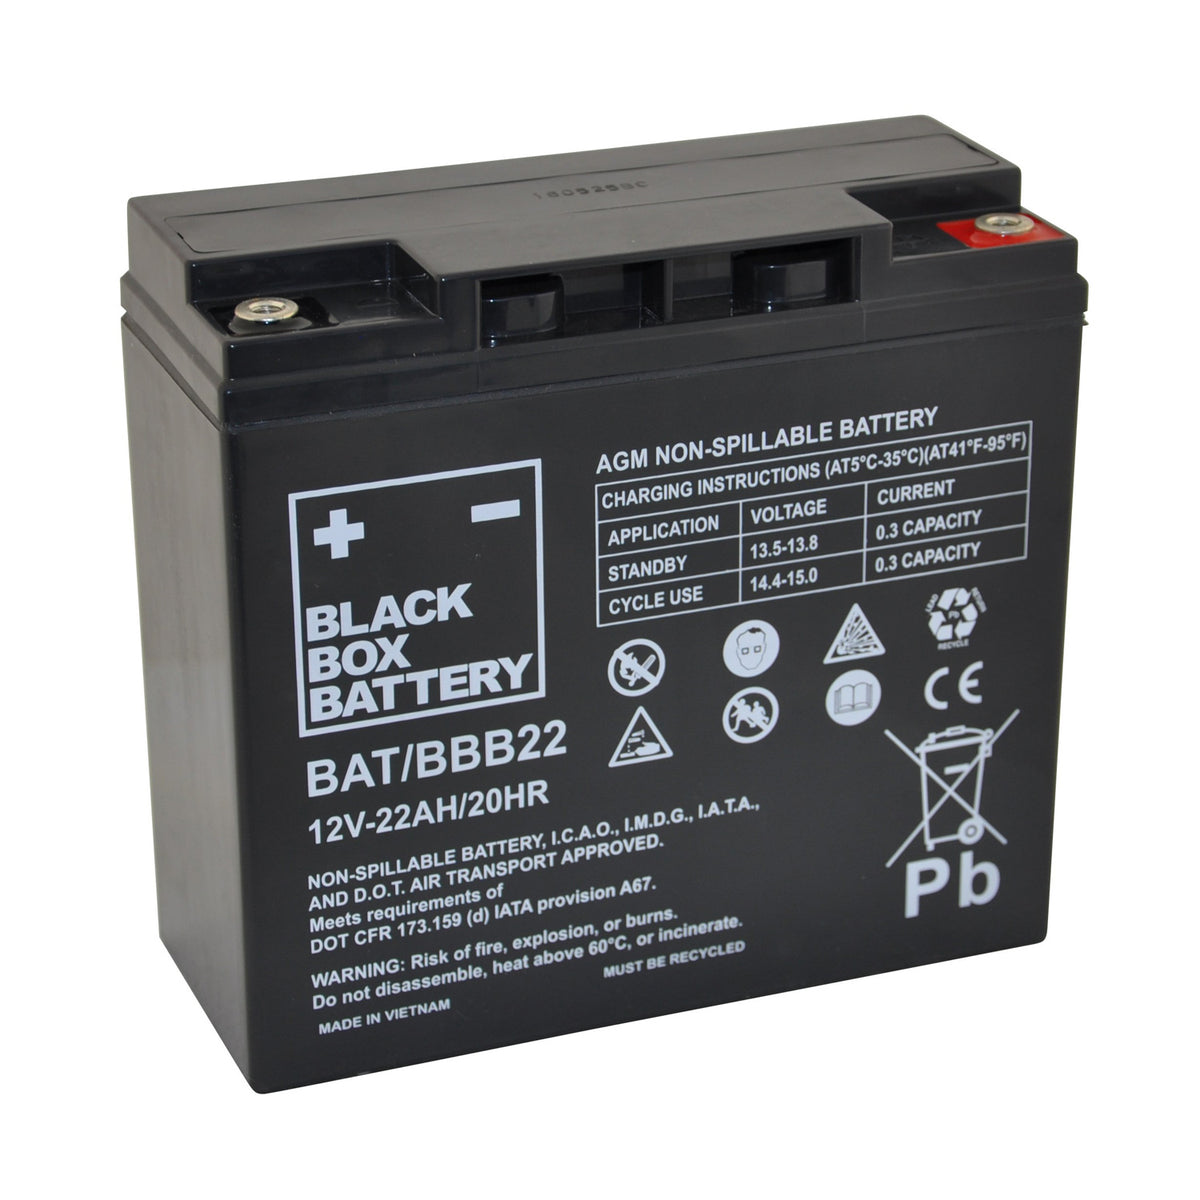 Battery upgrade 18Ah to 22Ah (only available with a scooter purchase)